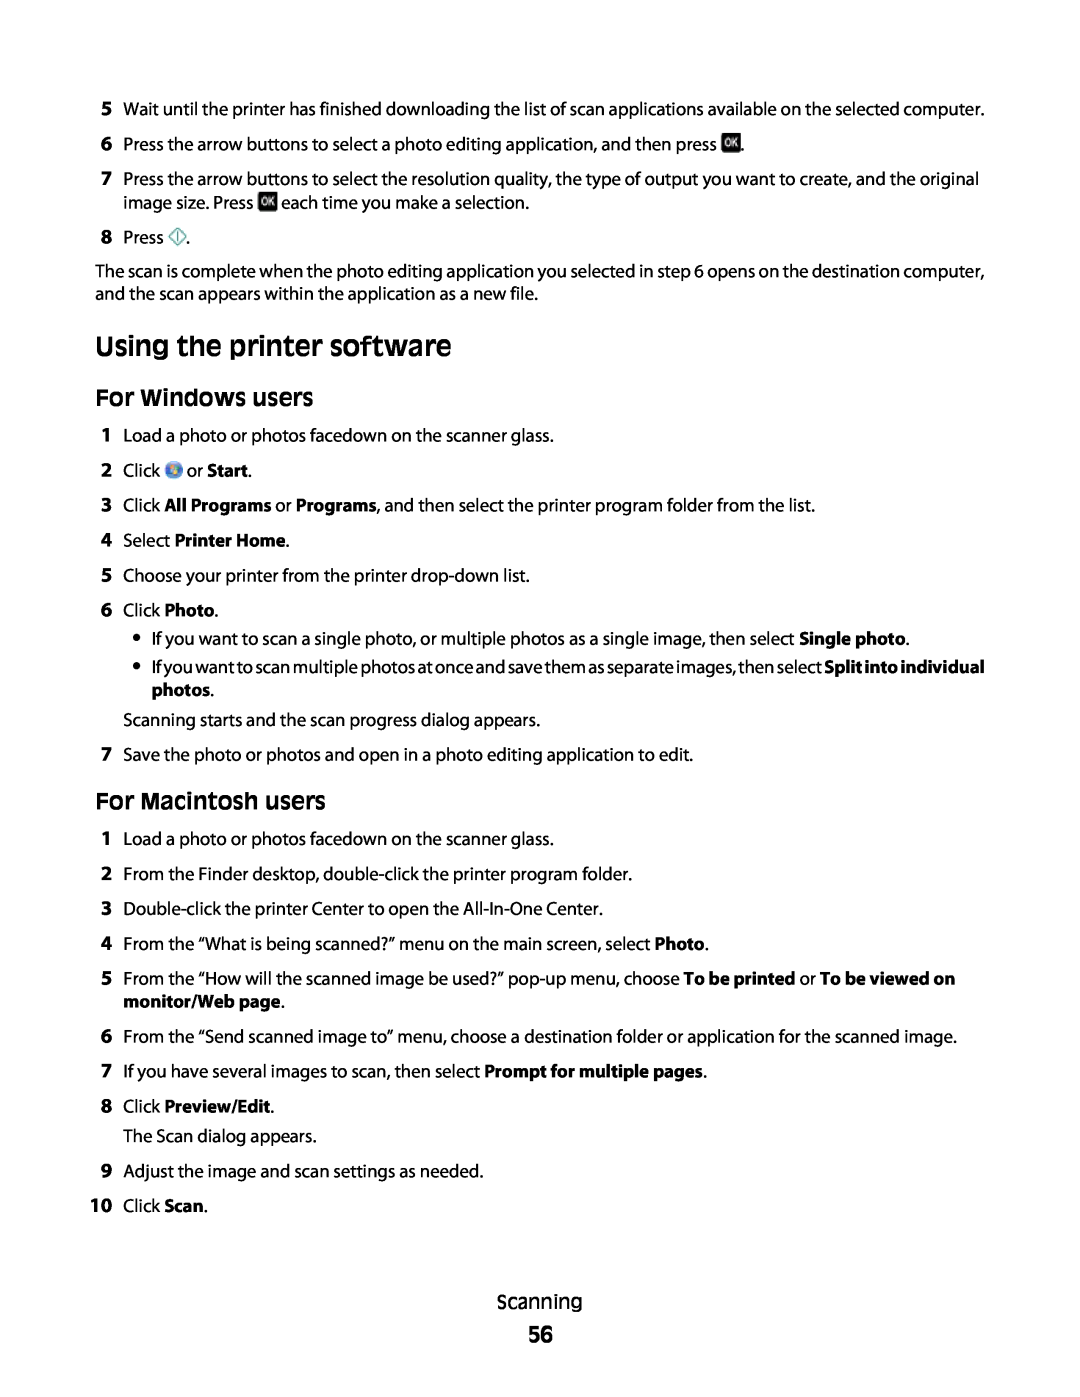 Lexmark 101 Using the printer software, For Windows users, For Macintosh users, 4Select Printer Home, 8Click Preview/Edit 